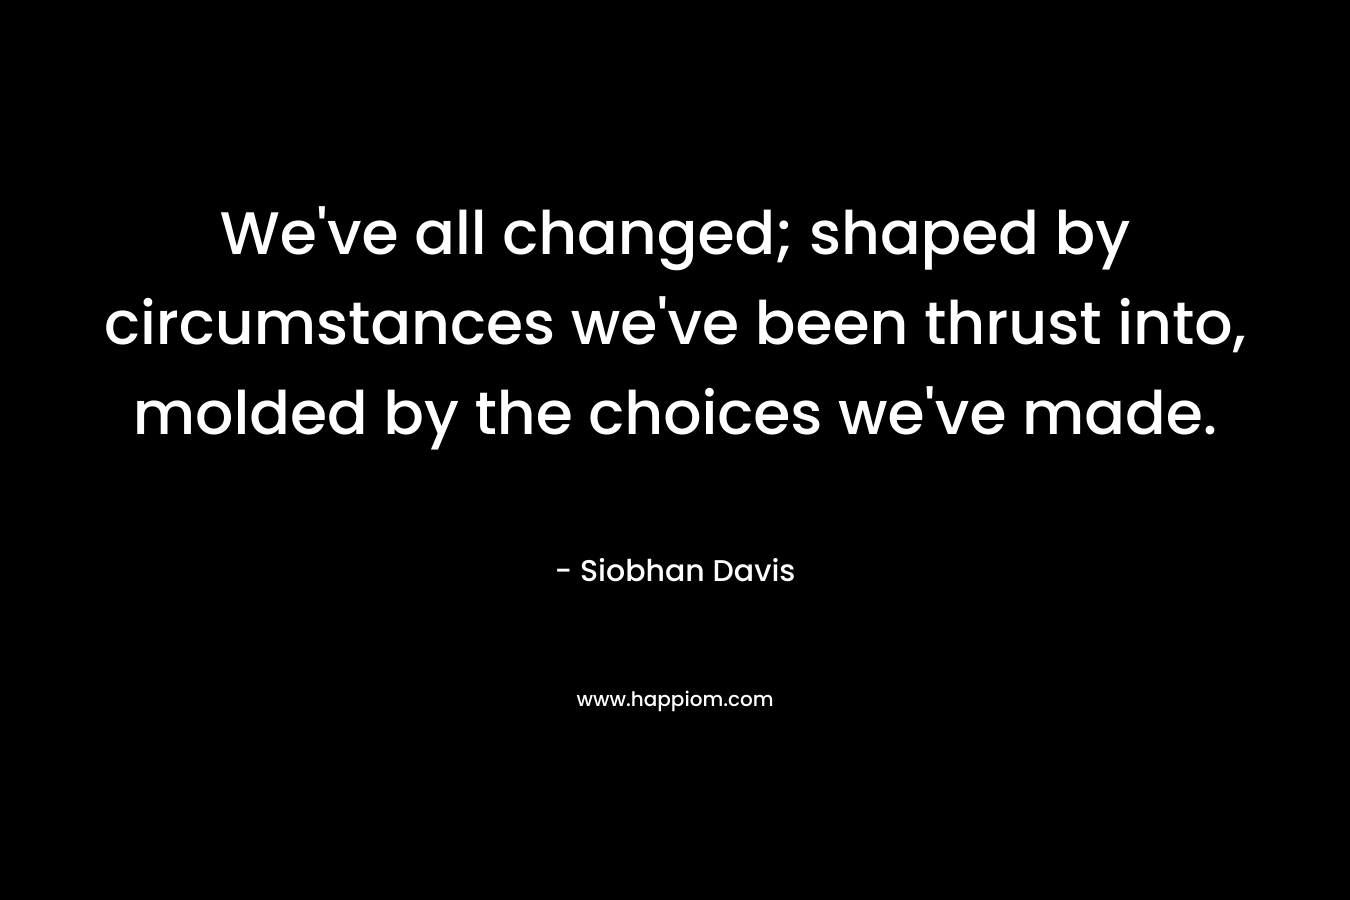 We've all changed; shaped by circumstances we've been thrust into, molded by the choices we've made.